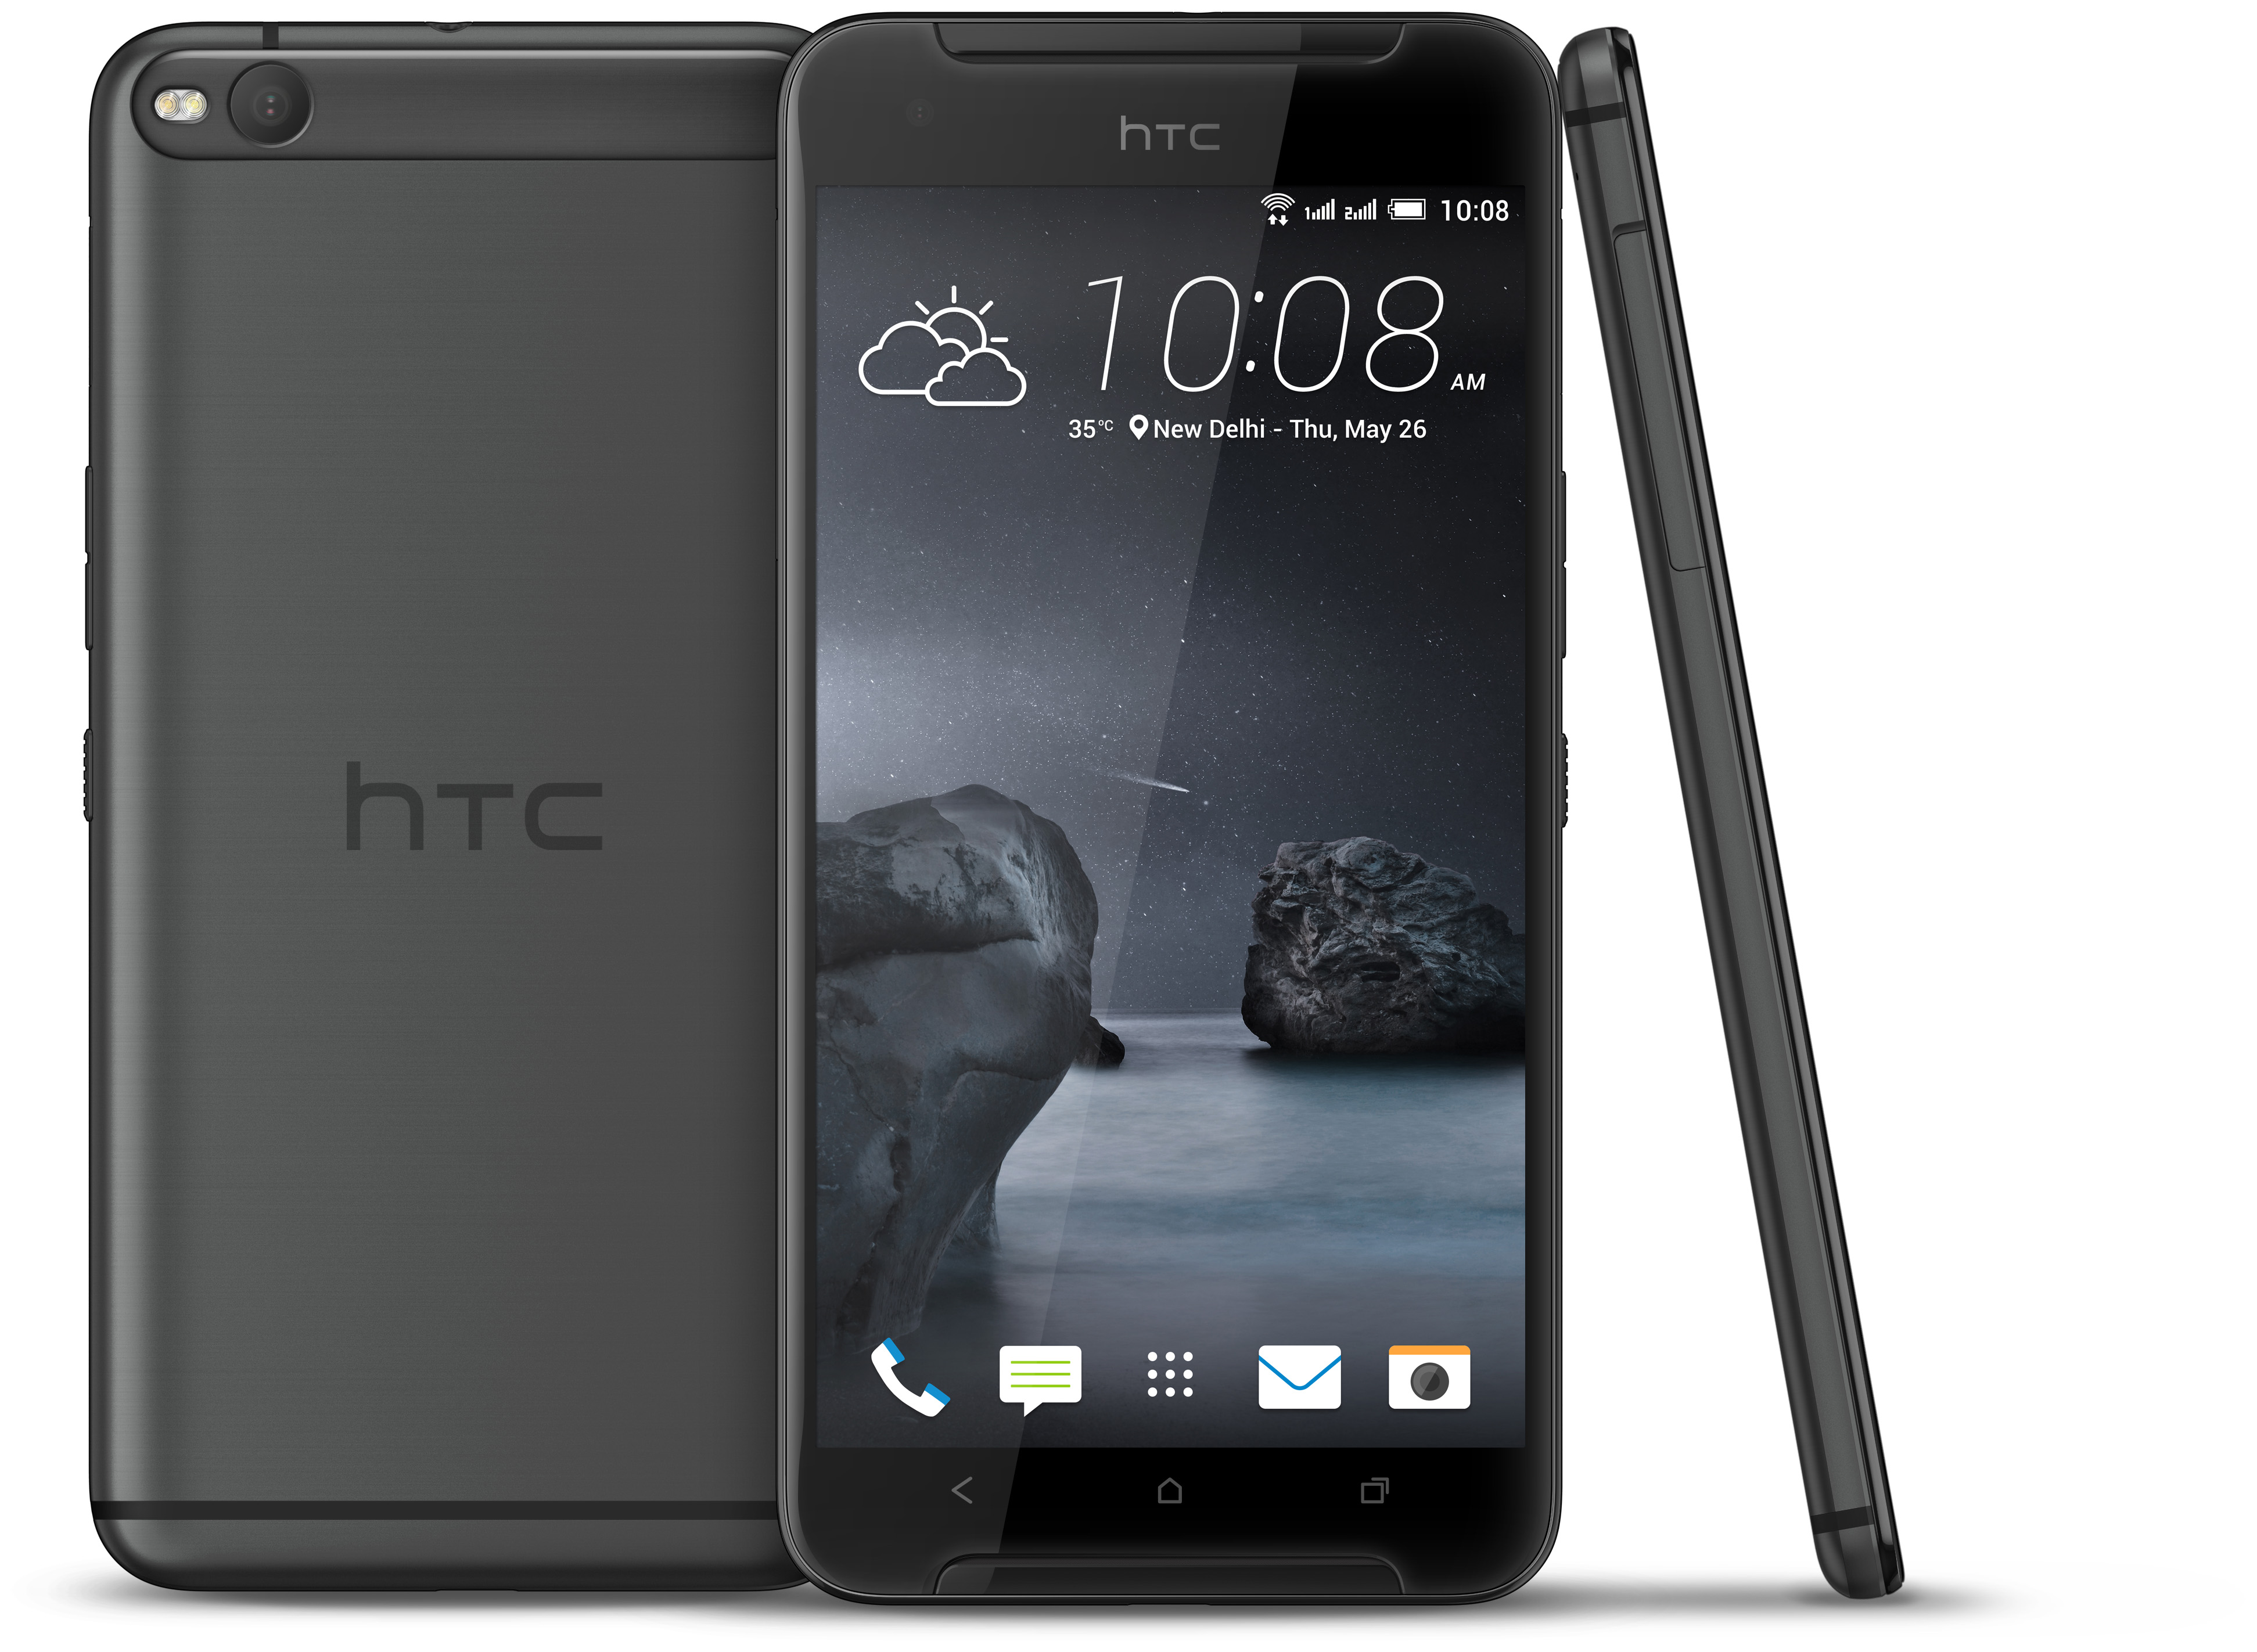 HTC introduces One X9 in Malaysia